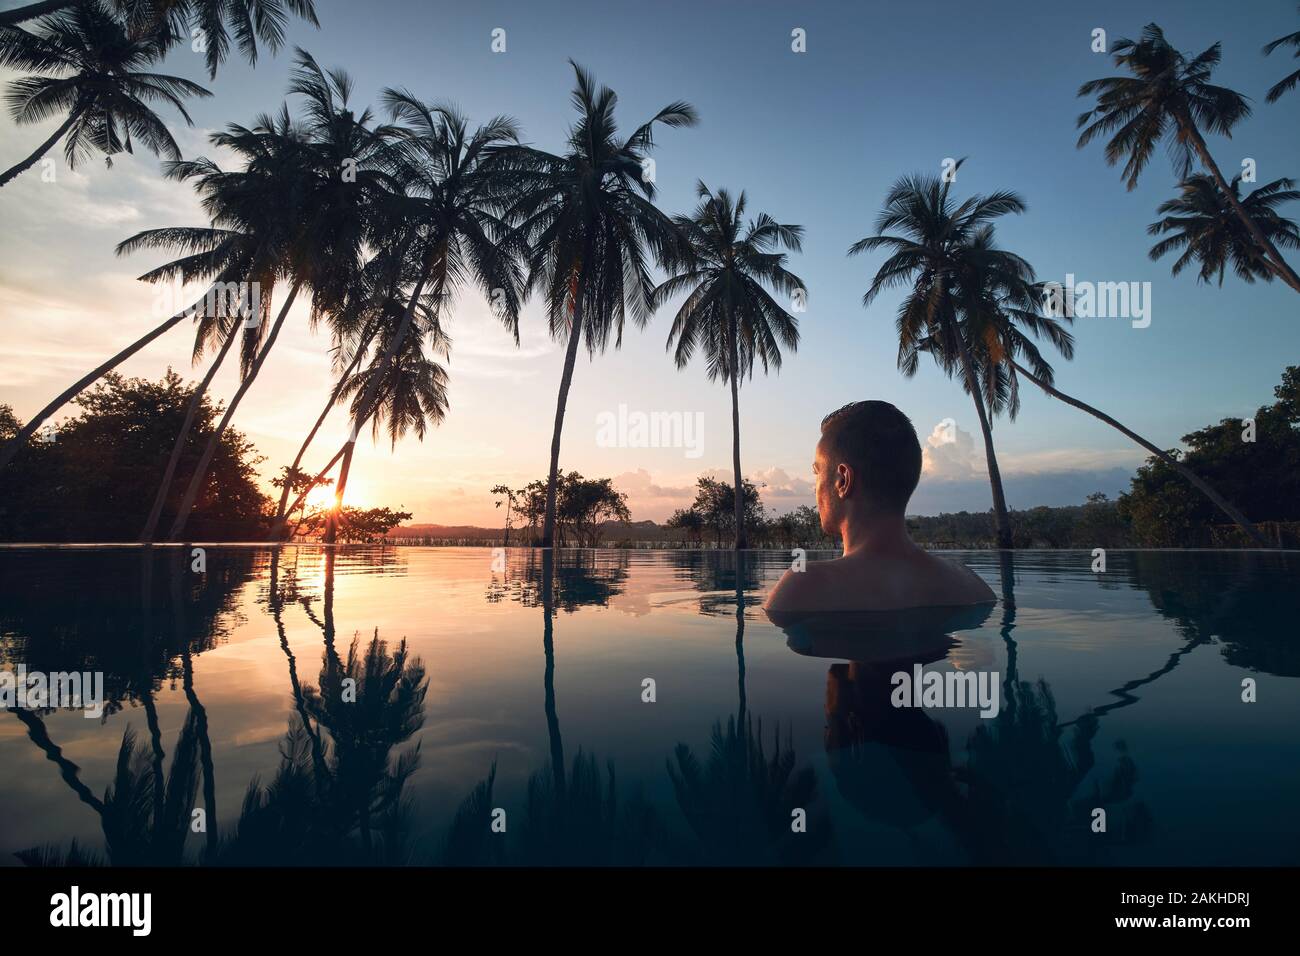 Young man watching sunset from swimming pool in the middle of coconut palm trees. Stock Photo